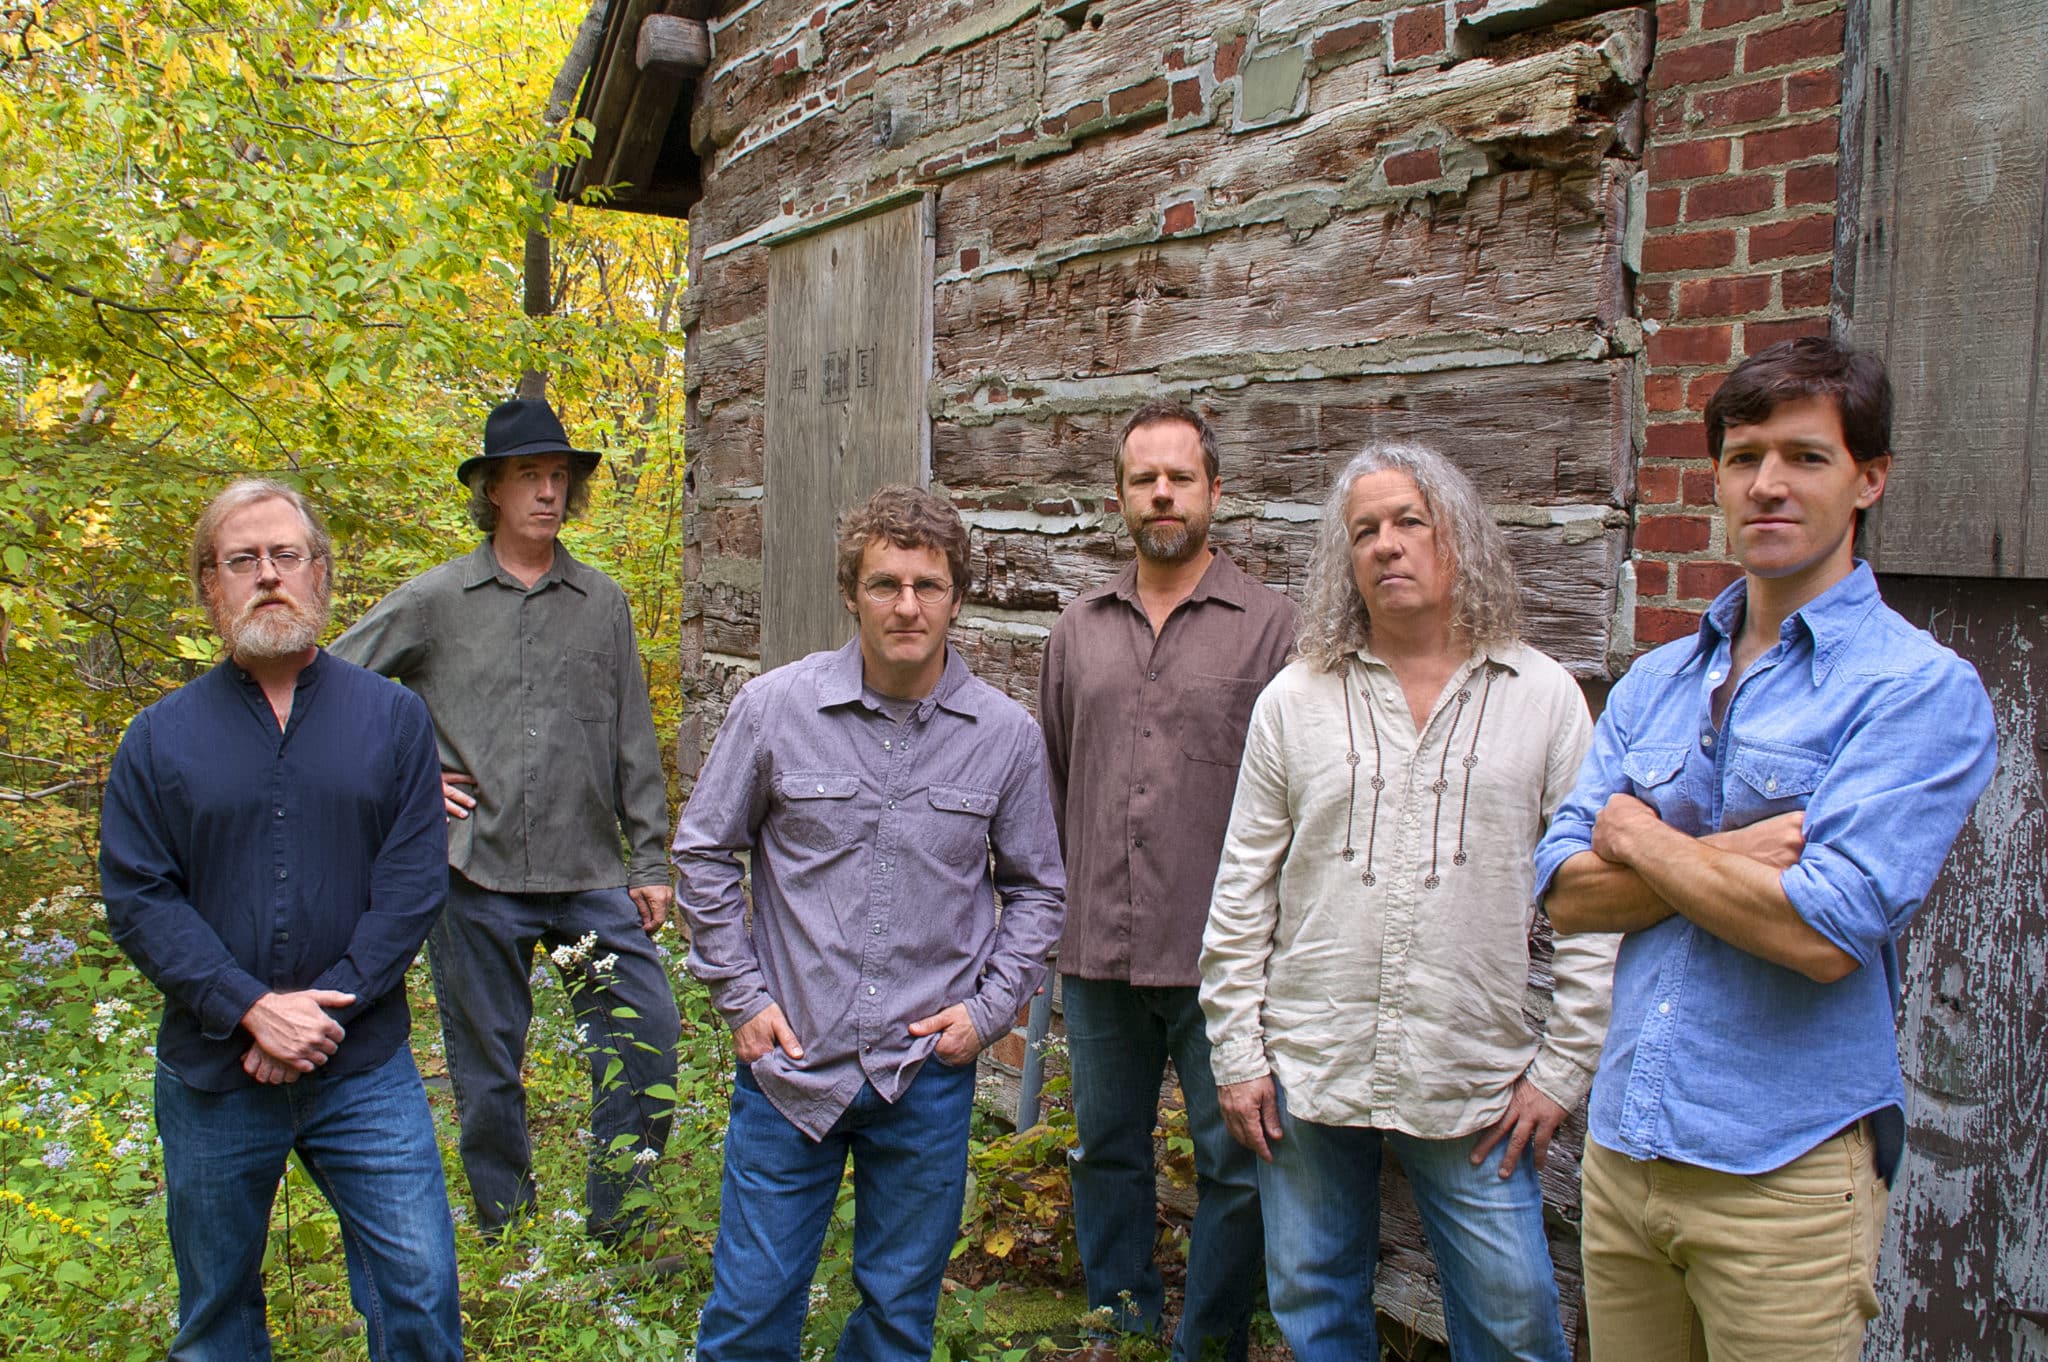 Railroad Earth will bring its jamgrass sound to Winter Wondergrass Tahoe in Squaw Valley Saturday, April 2.